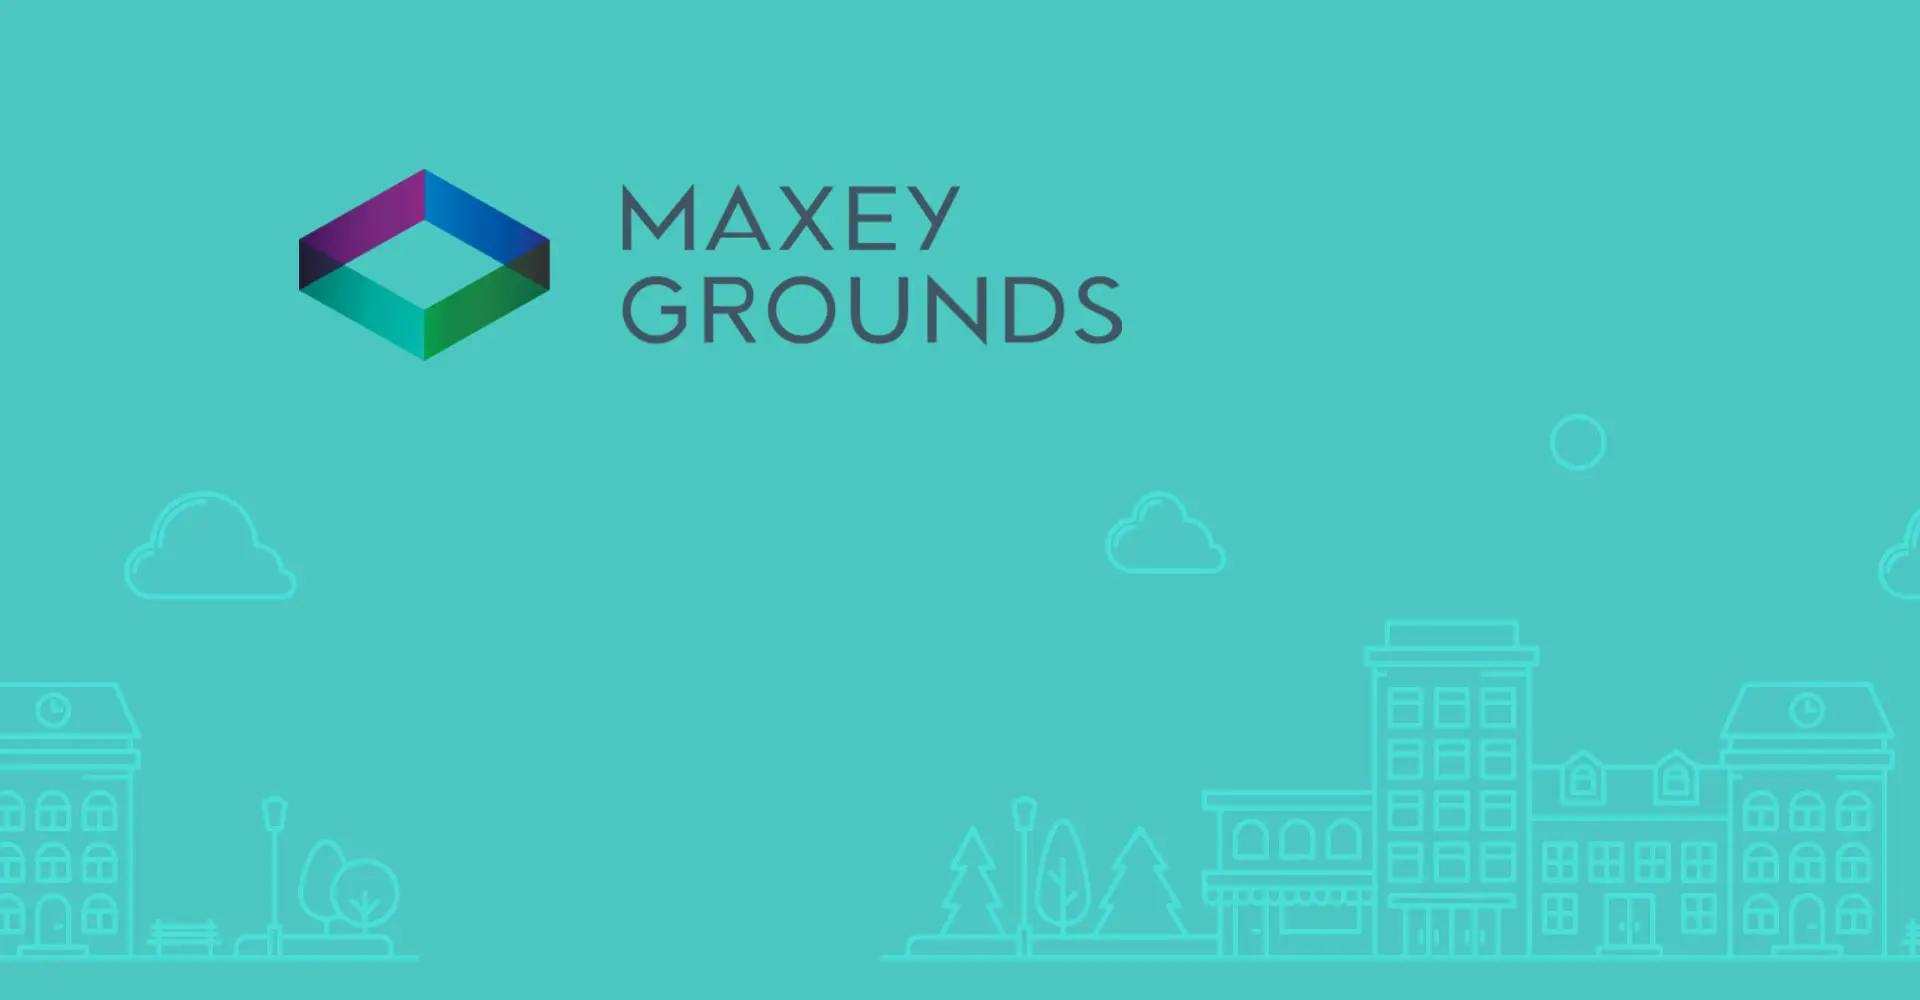 Maxey Grounds website poster